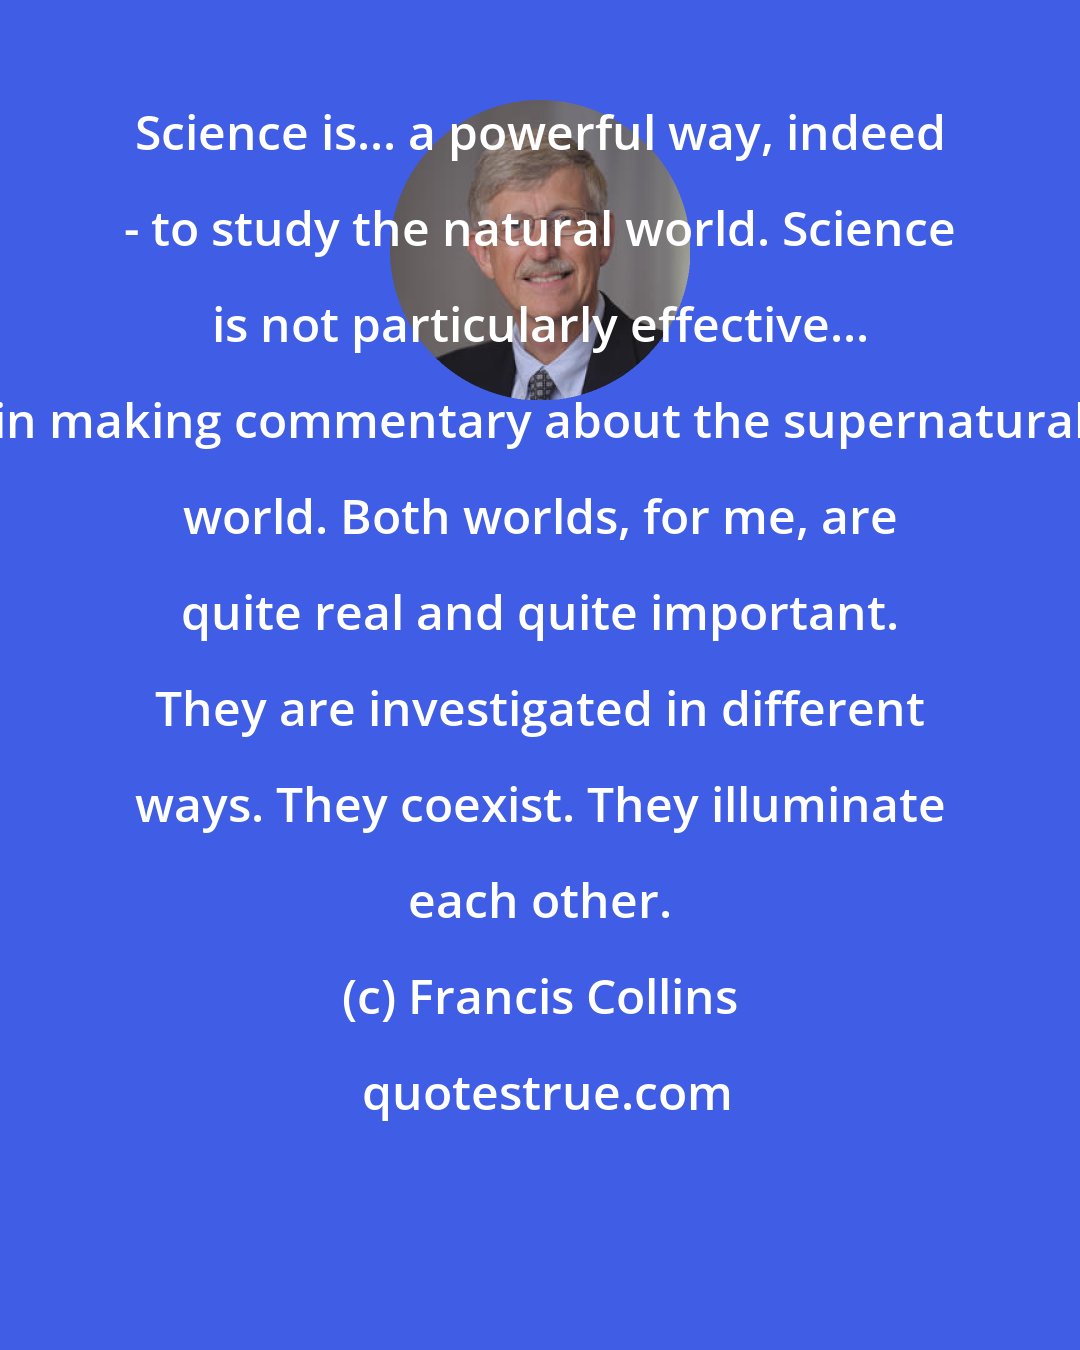 Francis Collins: Science is... a powerful way, indeed - to study the natural world. Science is not particularly effective... in making commentary about the supernatural world. Both worlds, for me, are quite real and quite important. They are investigated in different ways. They coexist. They illuminate each other.